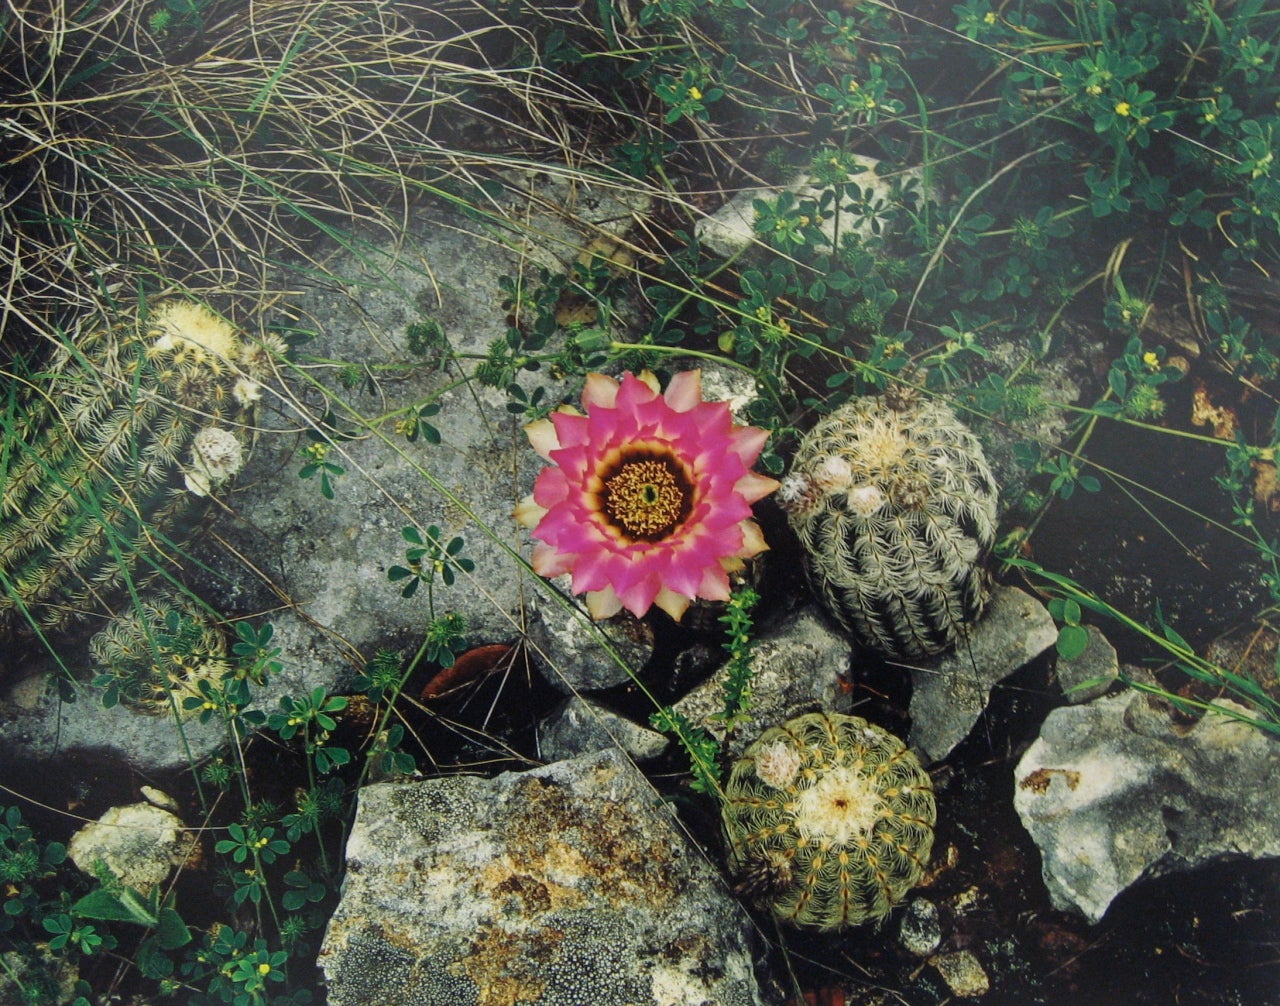 Lace Cactus and Yellow Sand, Austin, Texas - Photograph by Jim Bones